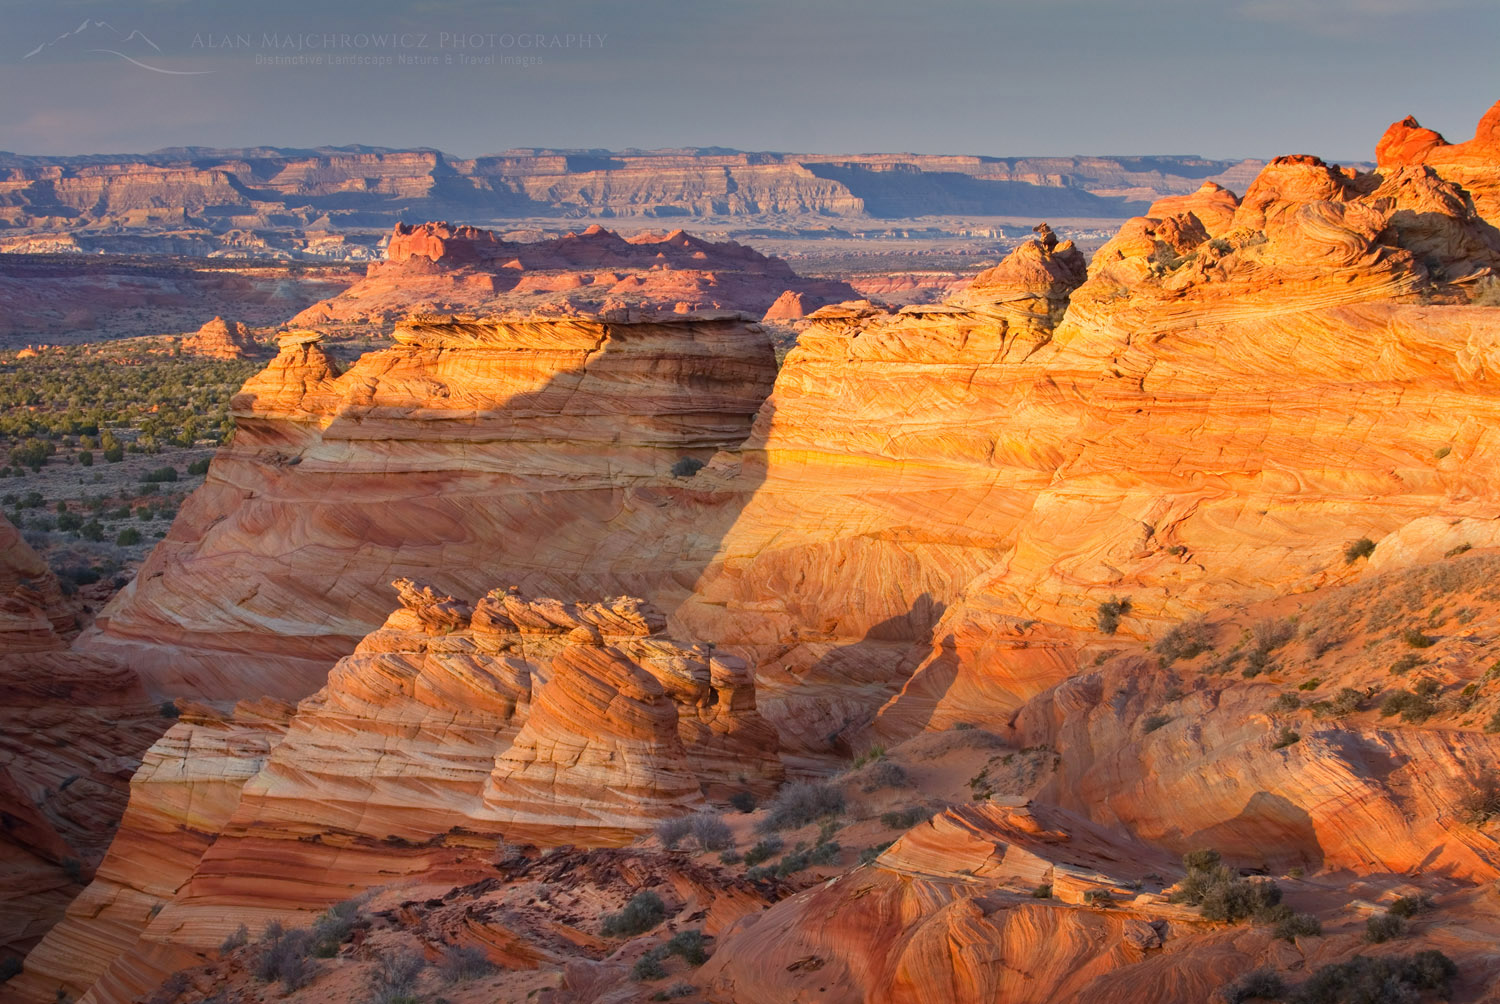 Setting sun illuminating cross-bedding in sandstone buttes of South Coyote Buttes, Vermilion Cliffs Wilderness Arizona #37814